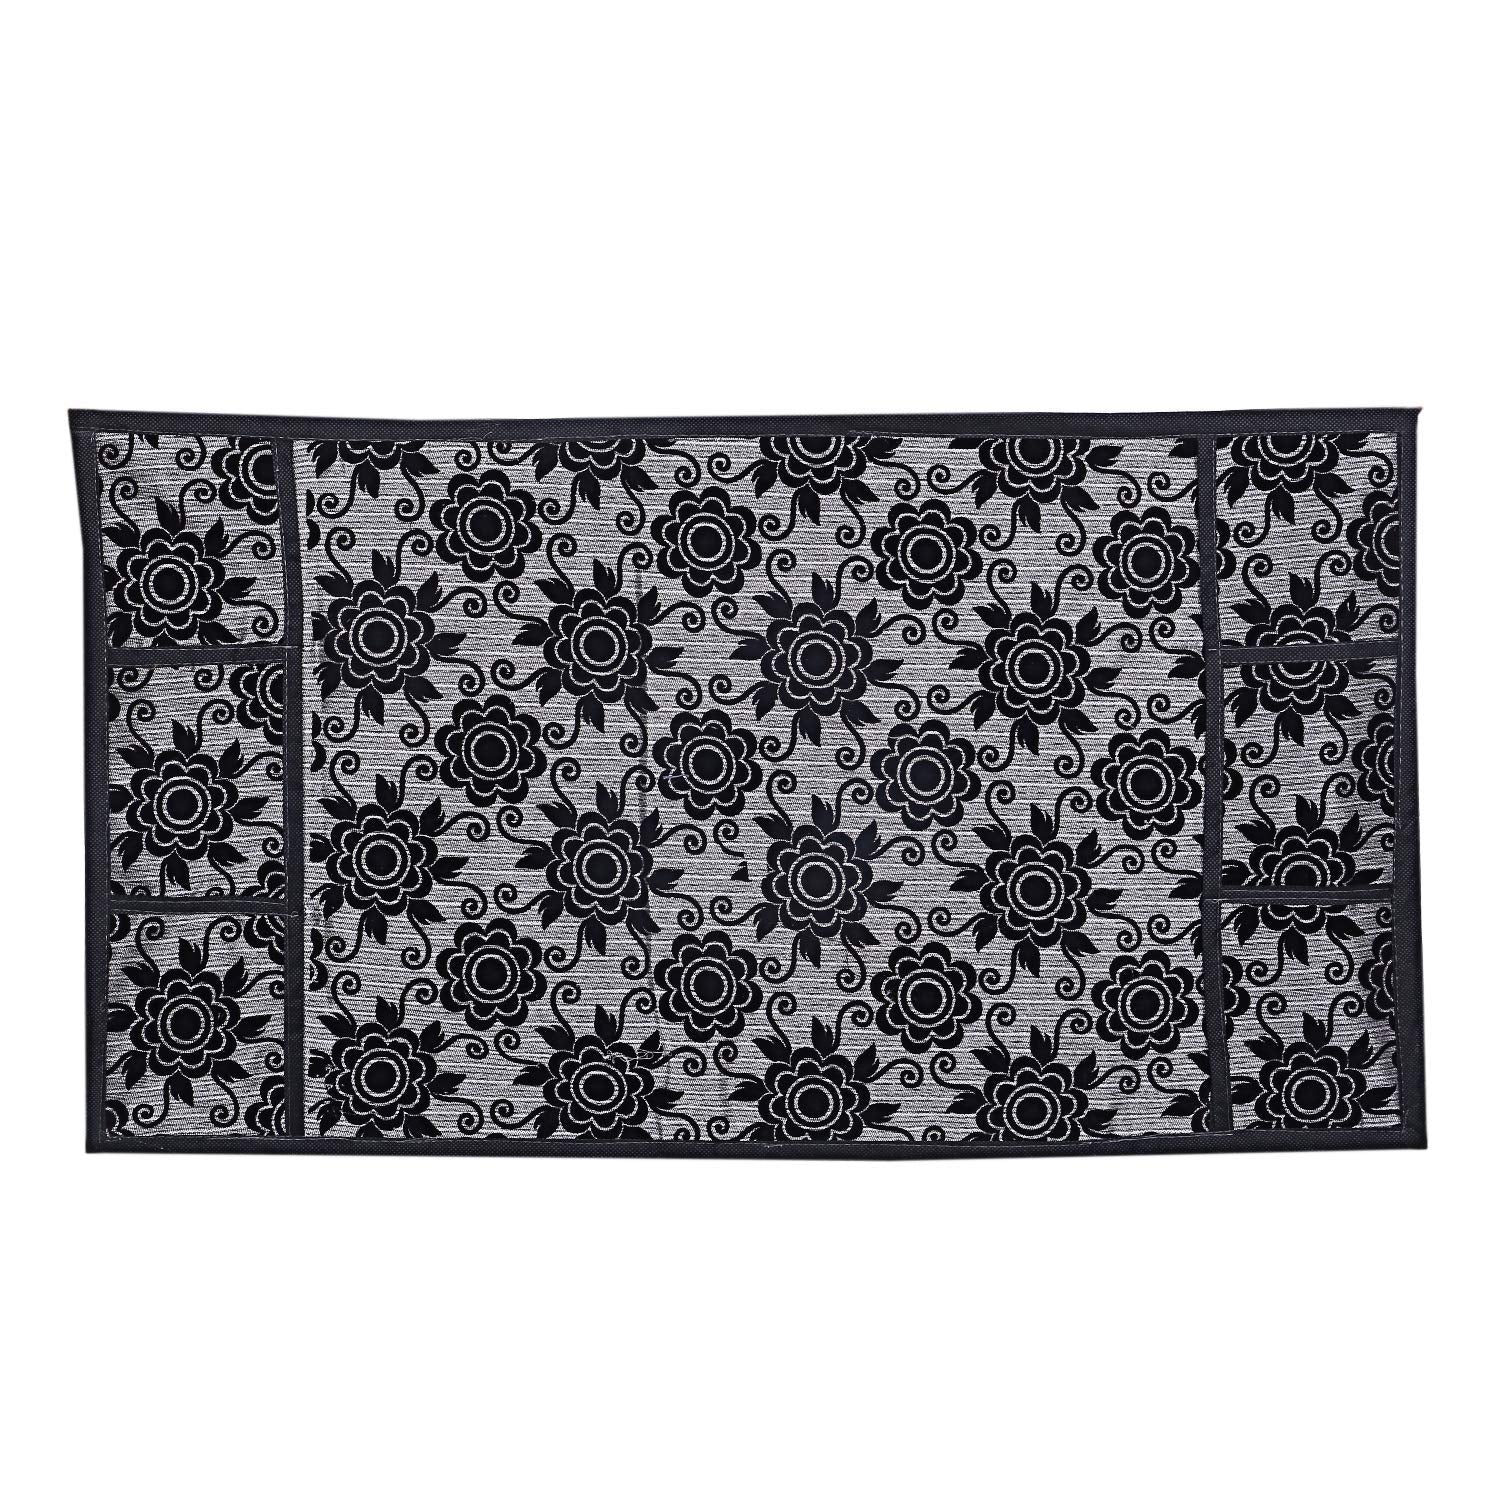 Kuber Industries Fridge Top Cover|Floral Print & Cotton Material|6 Utility Side Pockets with Plain Border|Size 94 x 54 CM, Pack of 1 (Black)